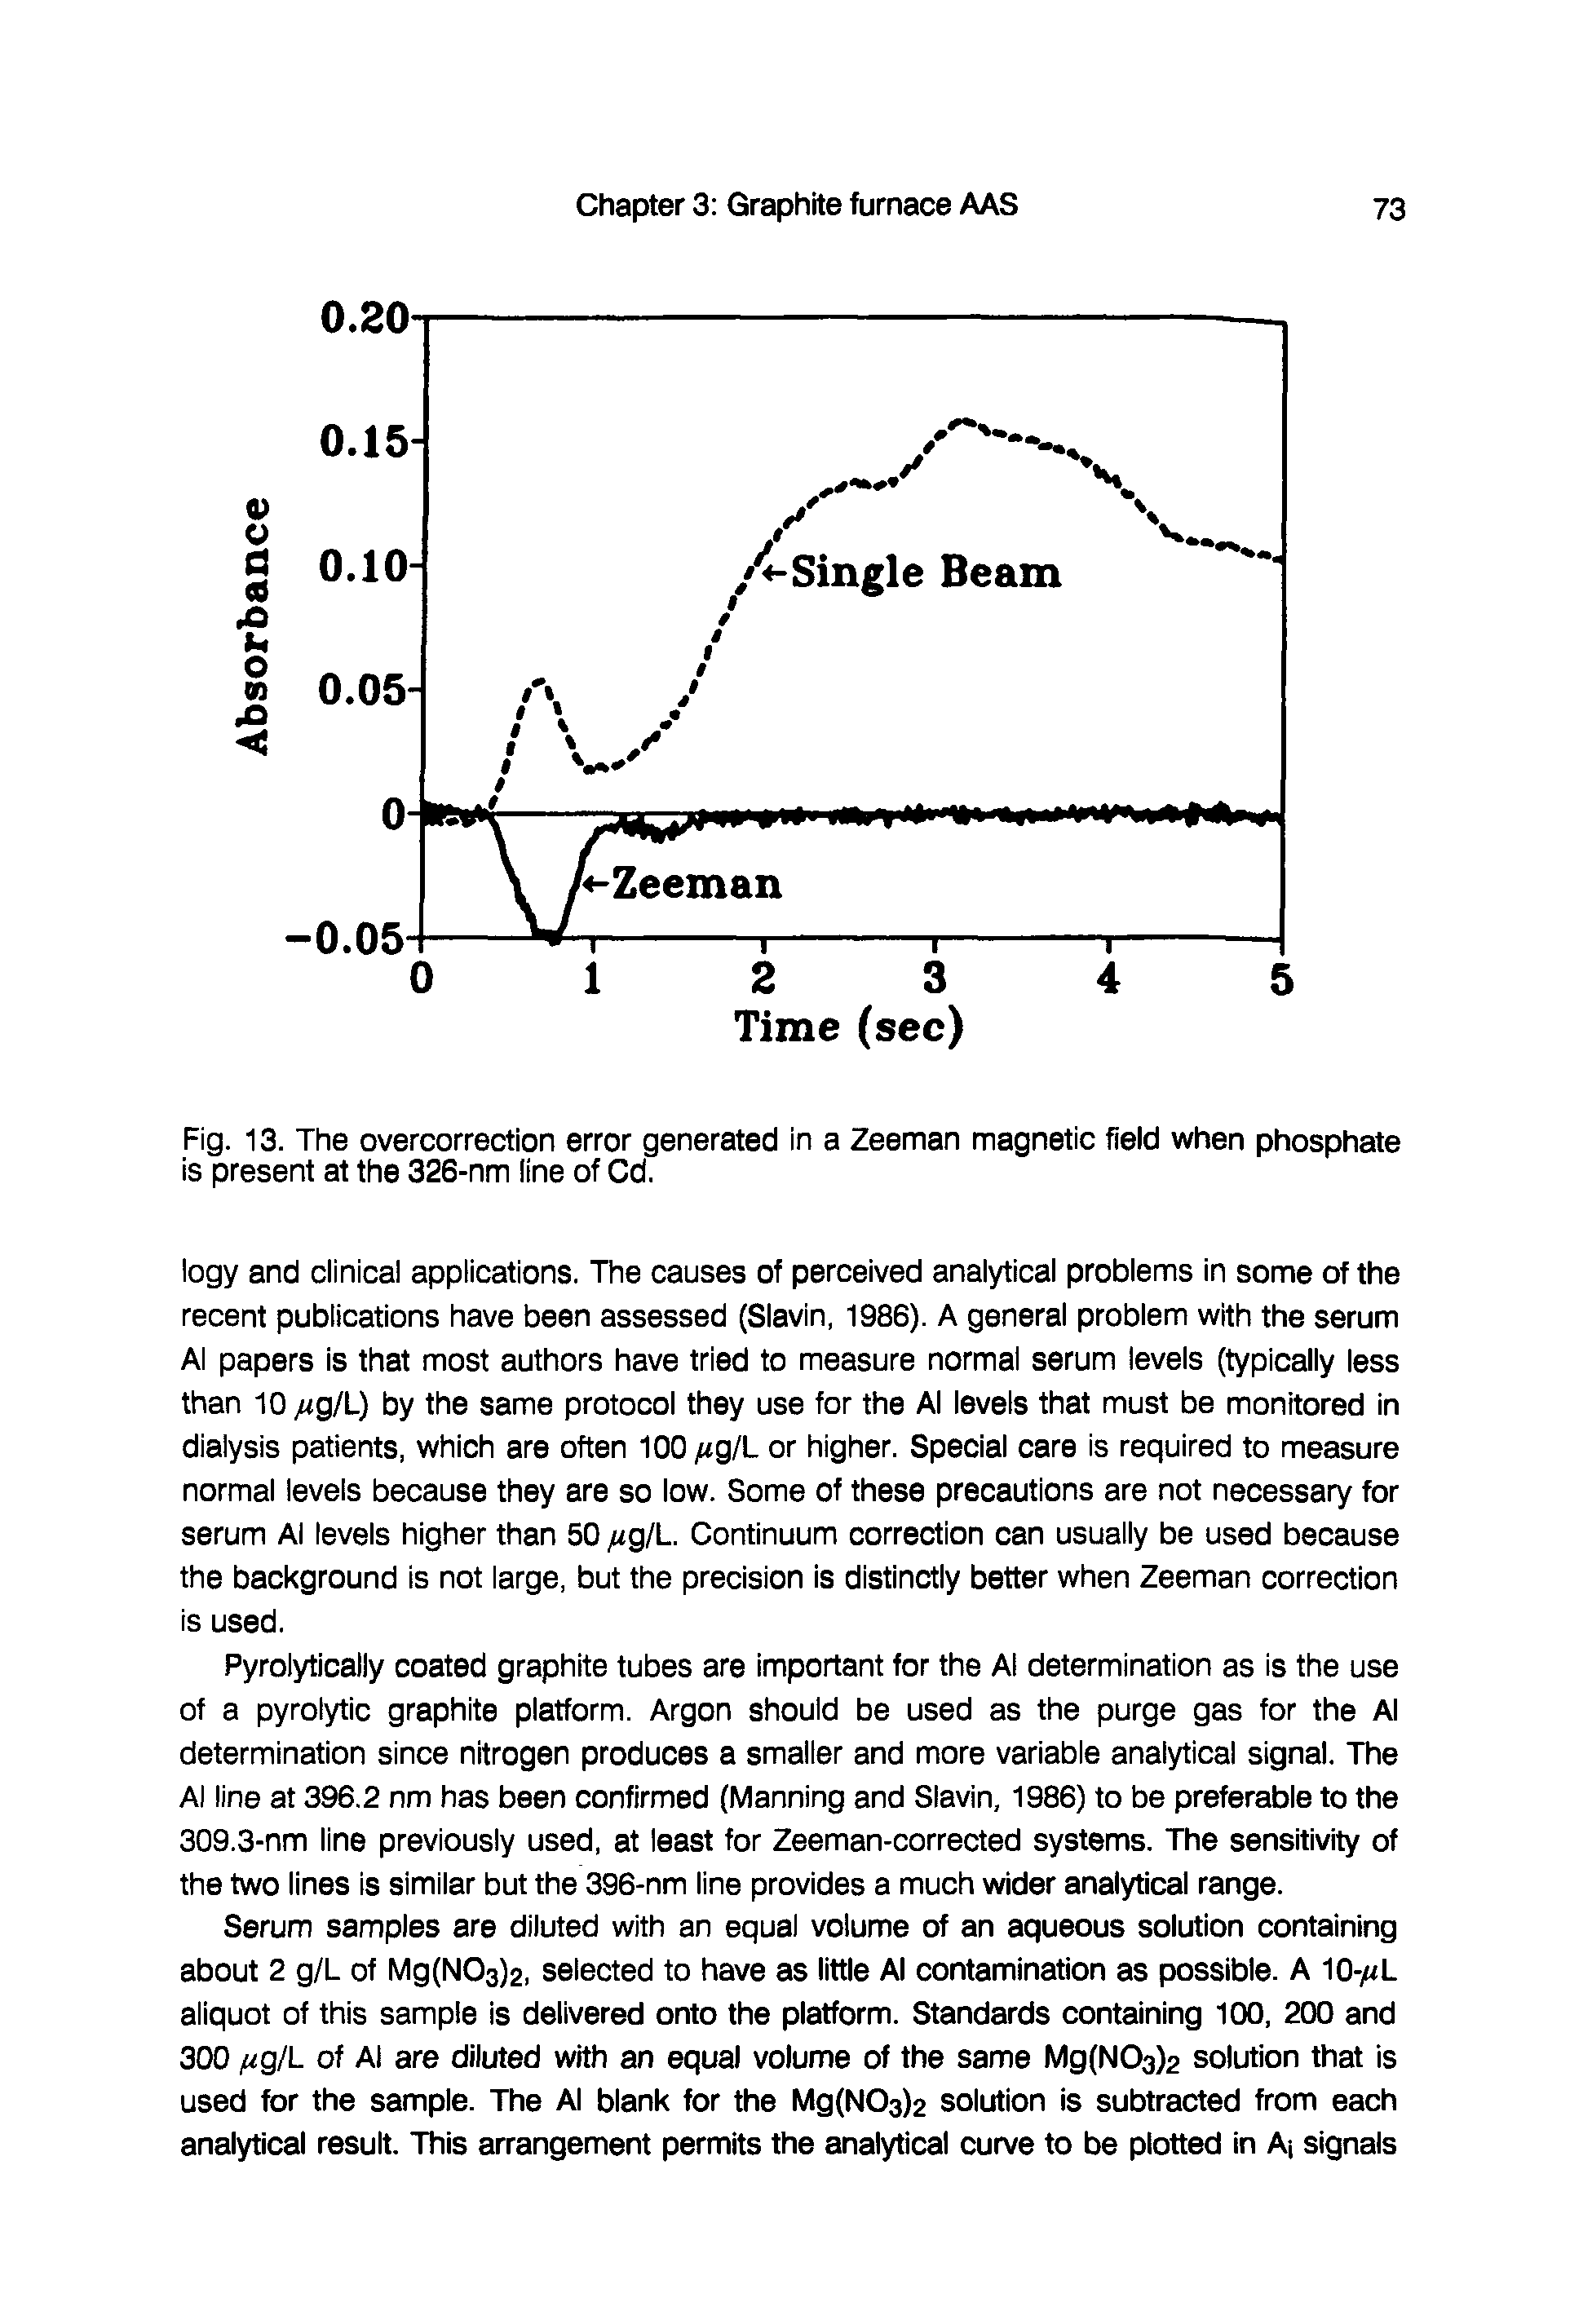 Fig. 13. The overcorrection error generated in a Zeeman magnetic field when phosphate is present at the 326-nm line of Cd.